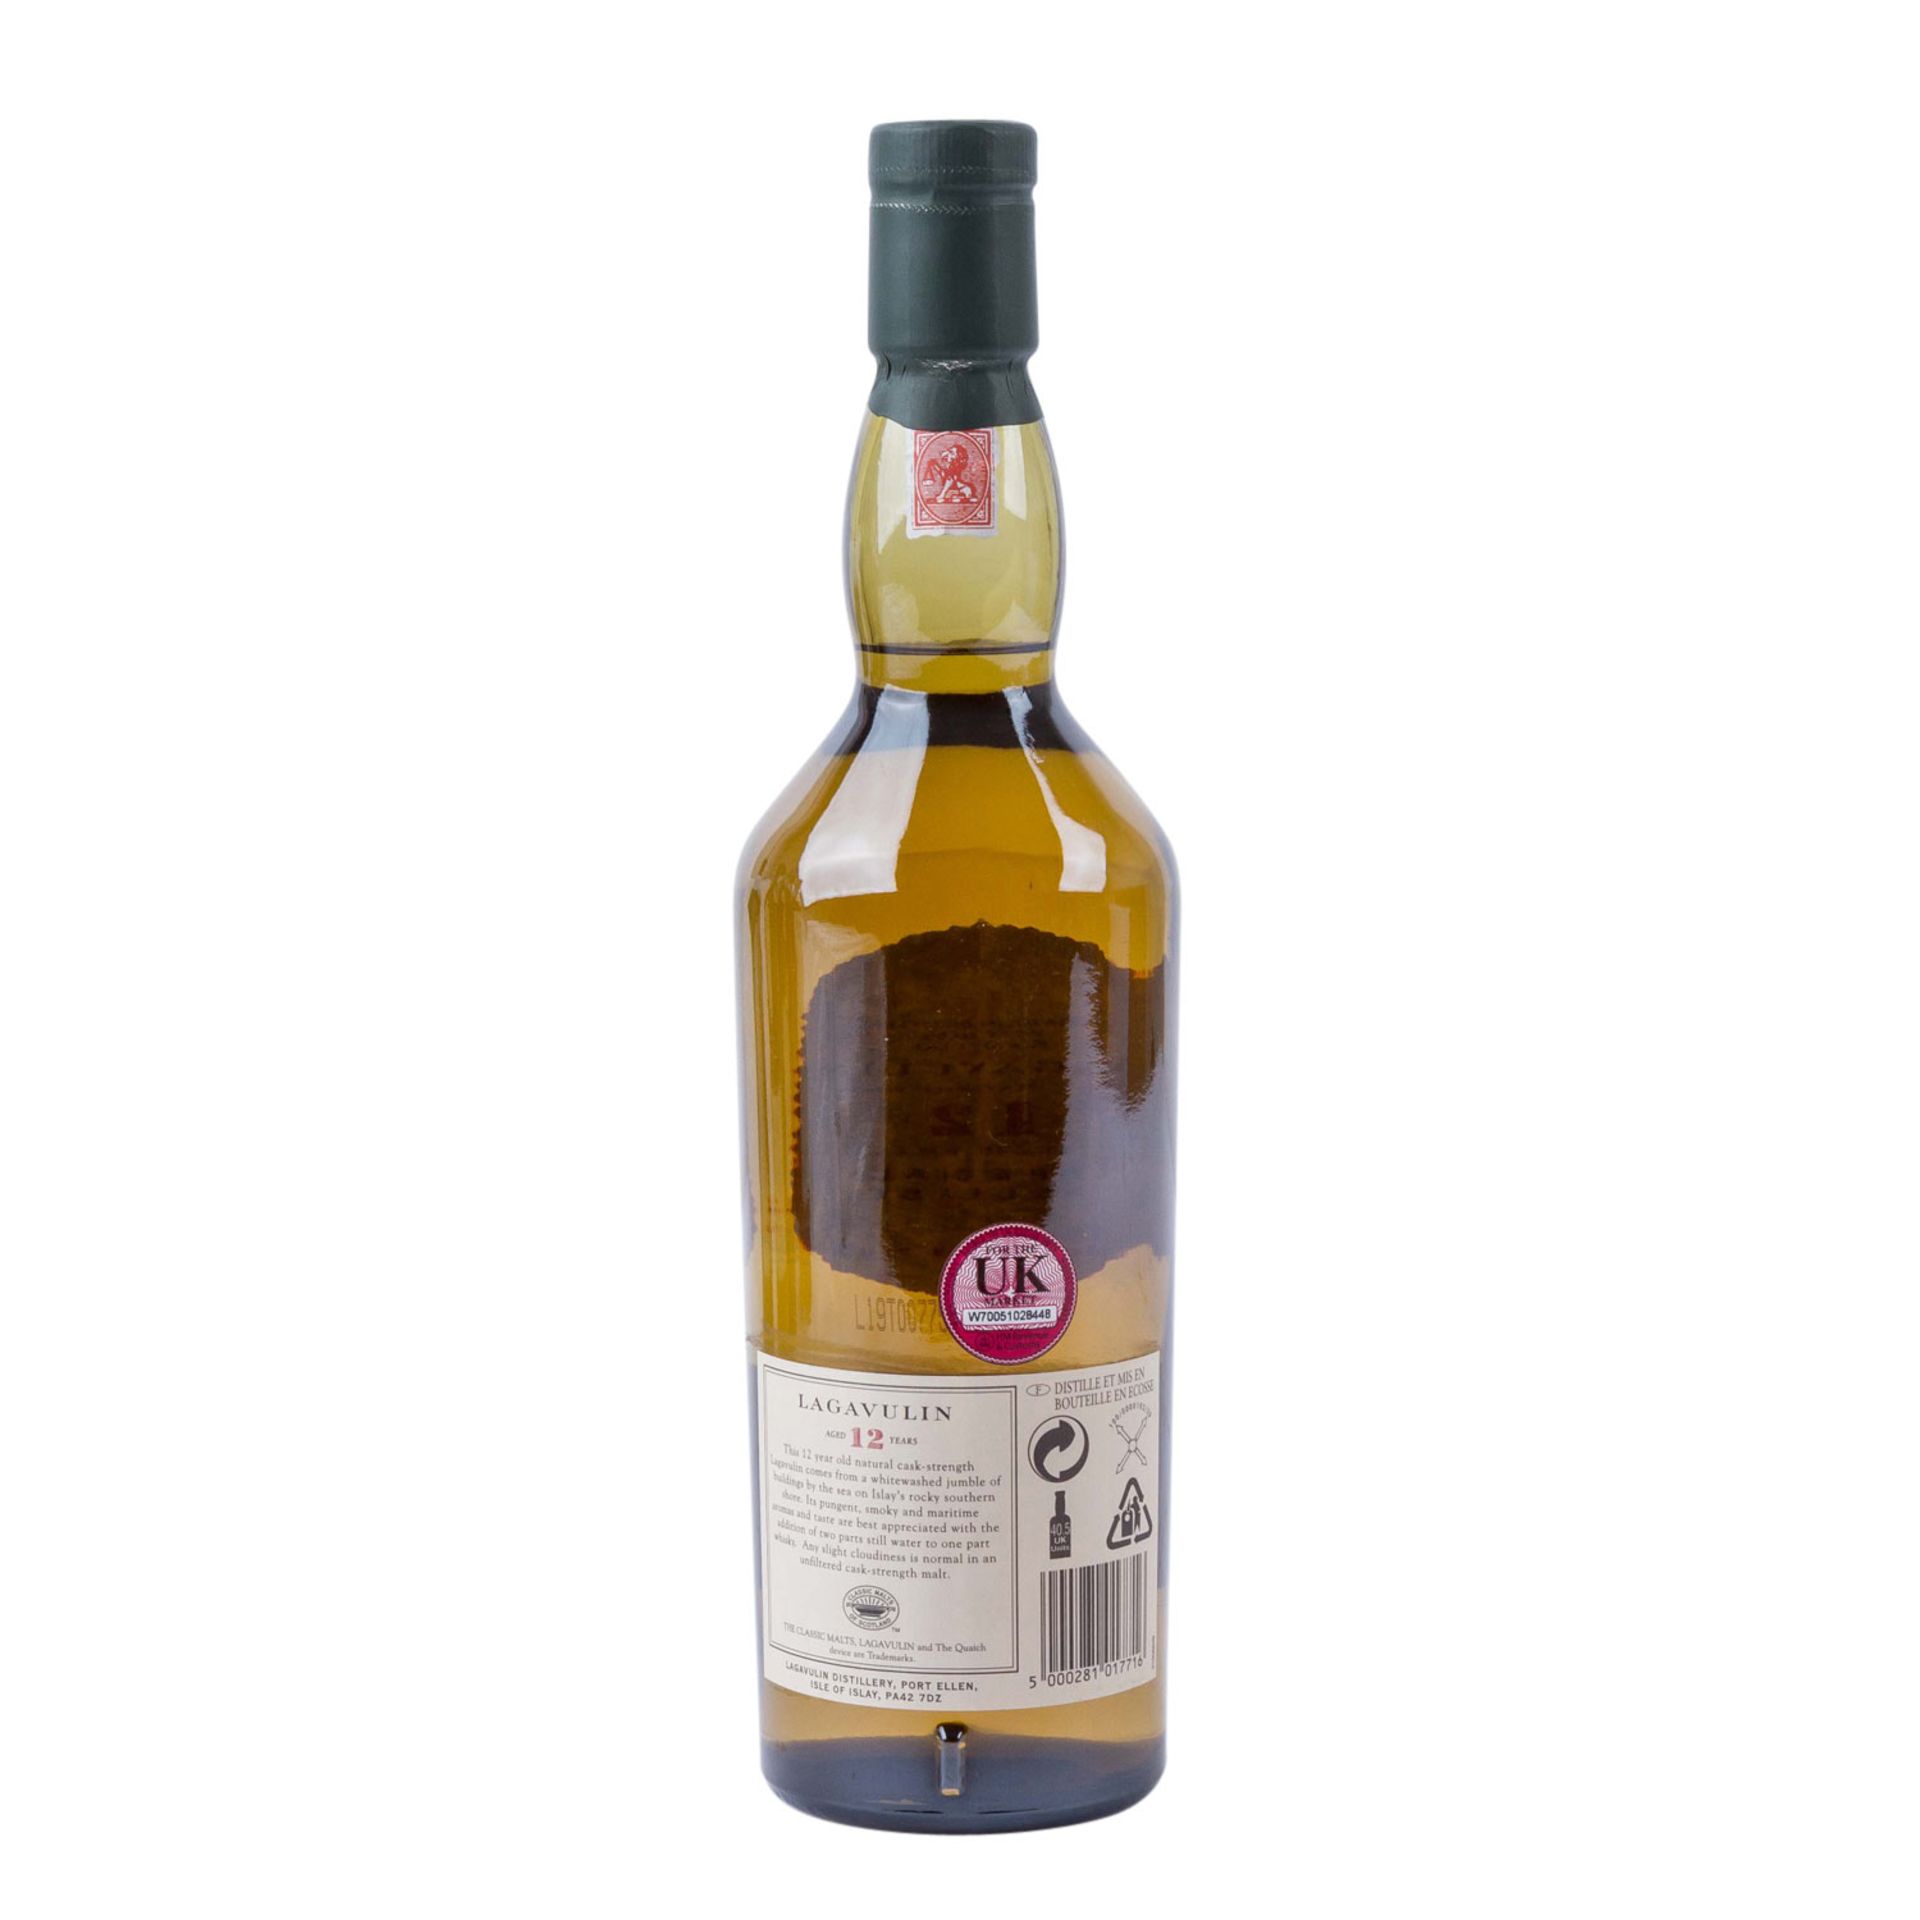 LAGAVULIN SPECIAL RELEASE Islay Single Malt Scotch Whisky 'Aged 12 Years' - Image 2 of 3